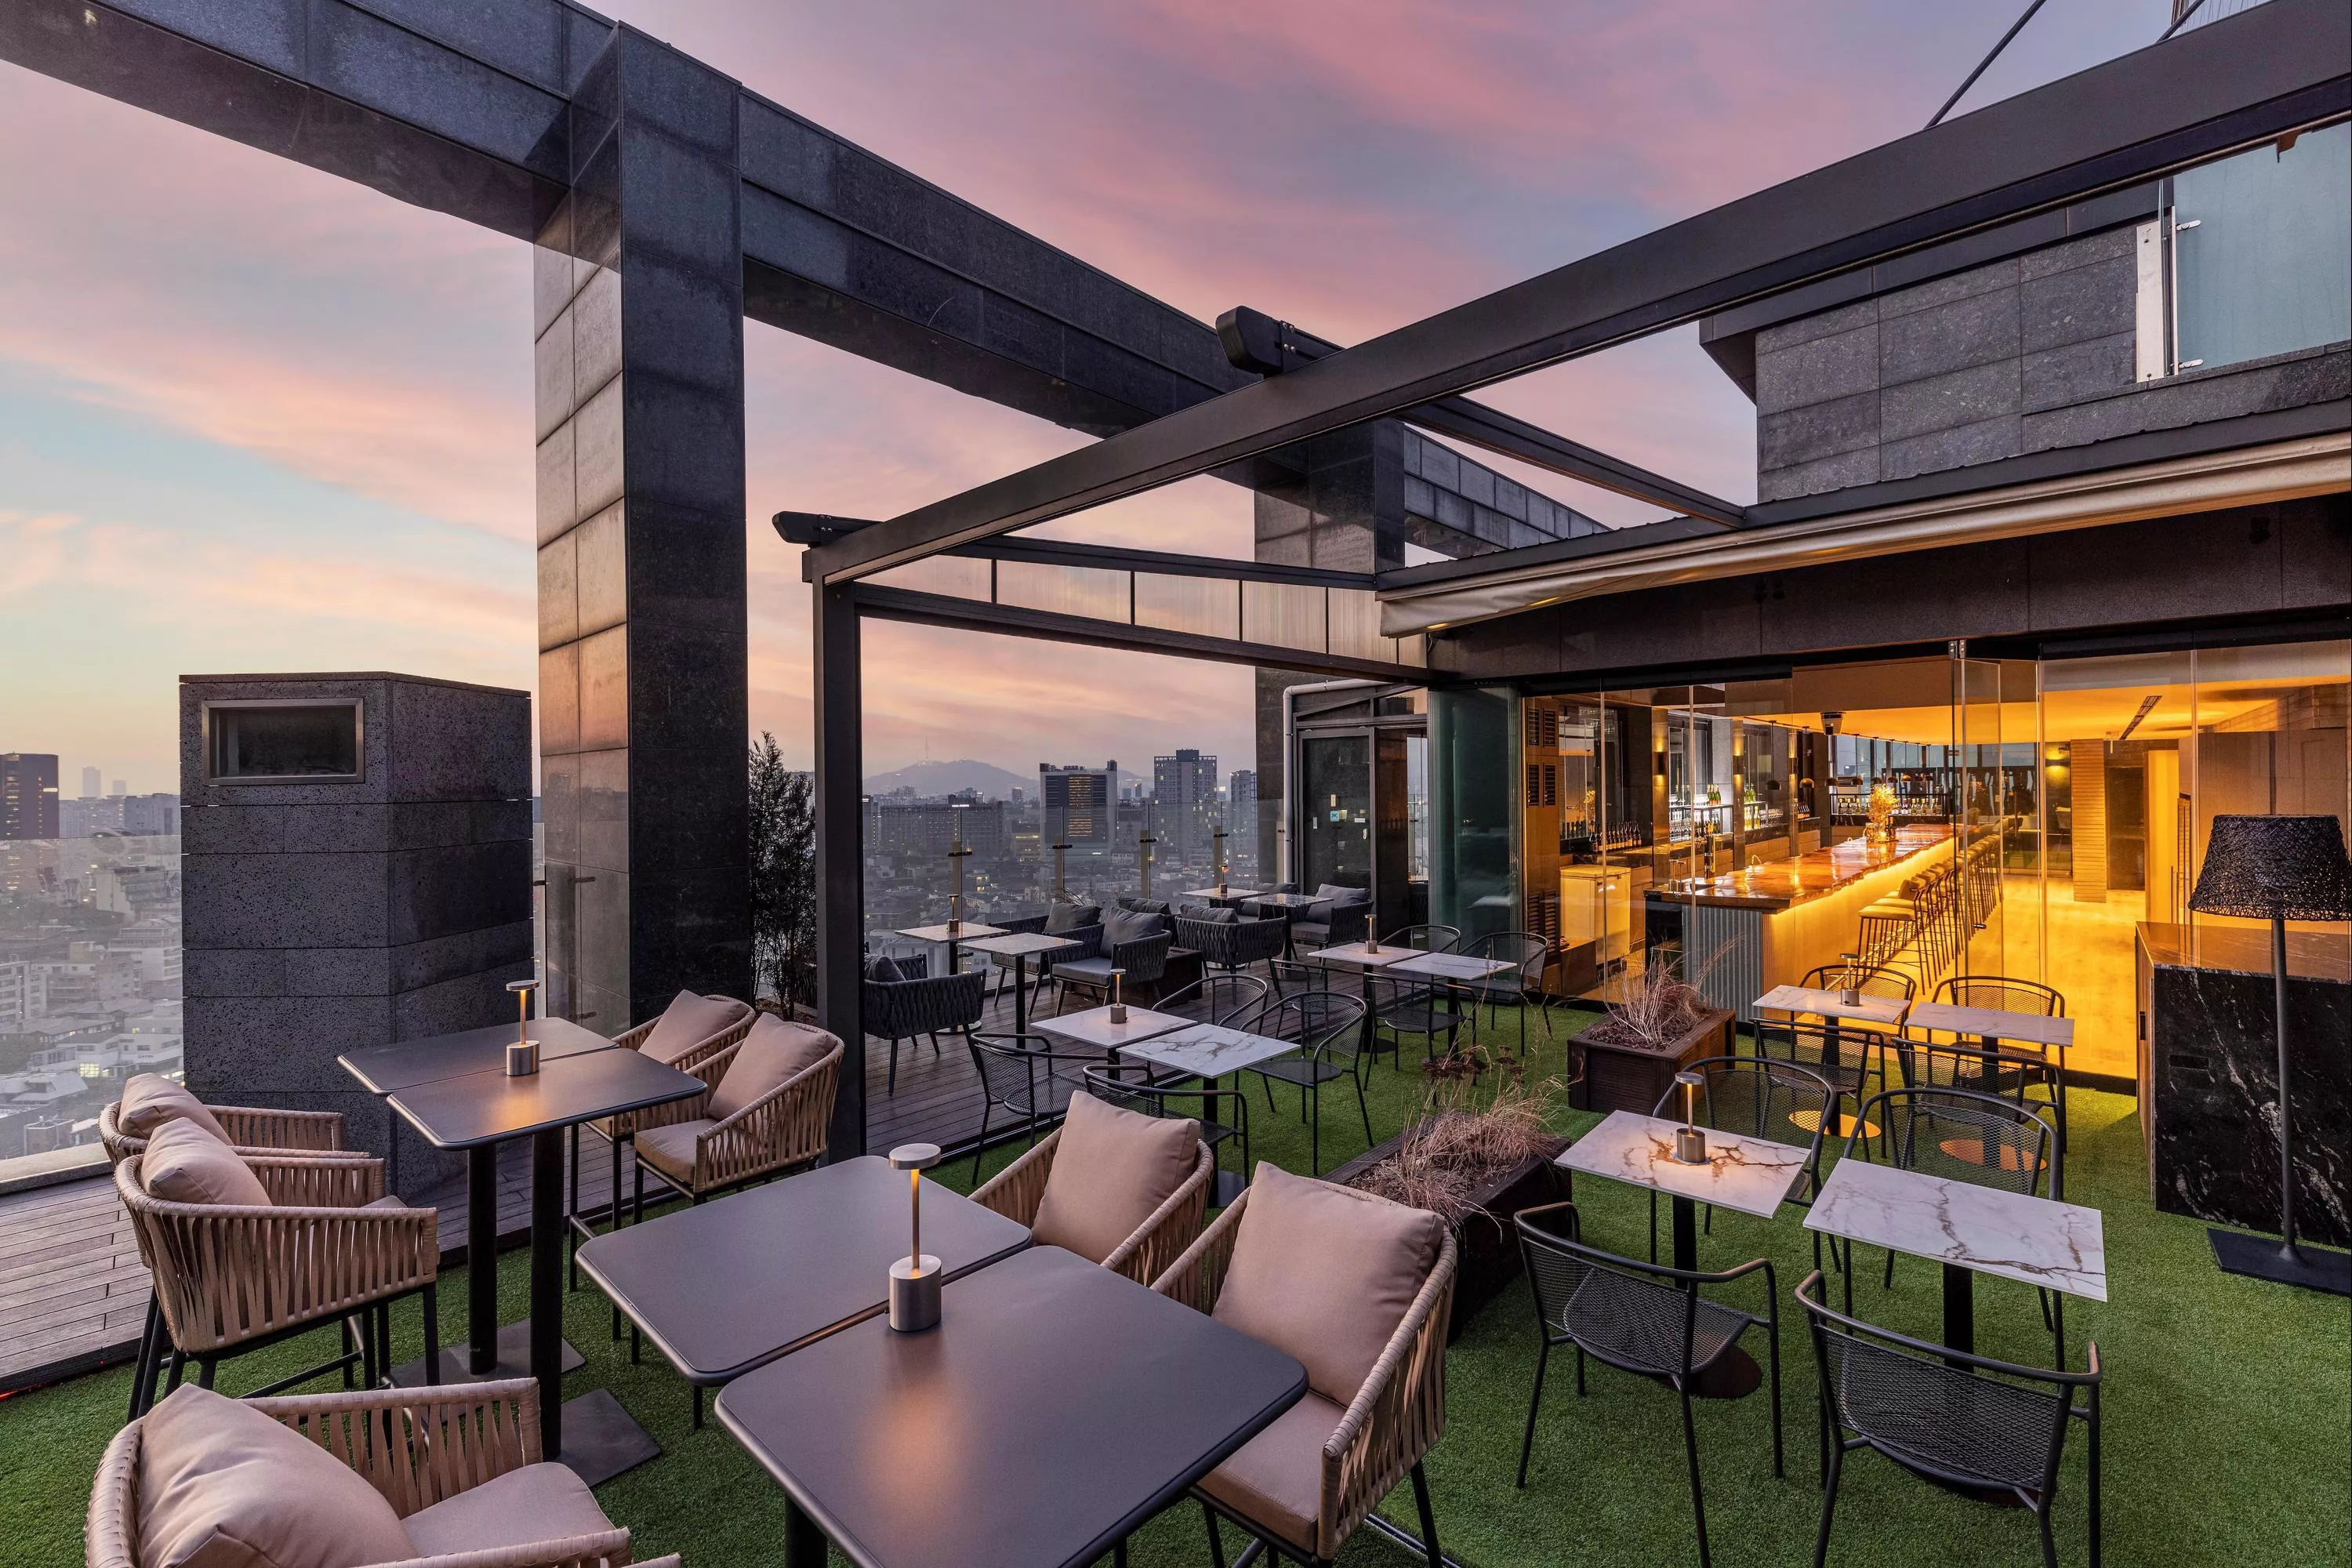 Rooftop Kloud in South Korea, East Asia | Observation Decks,Bars - Rated 3.3